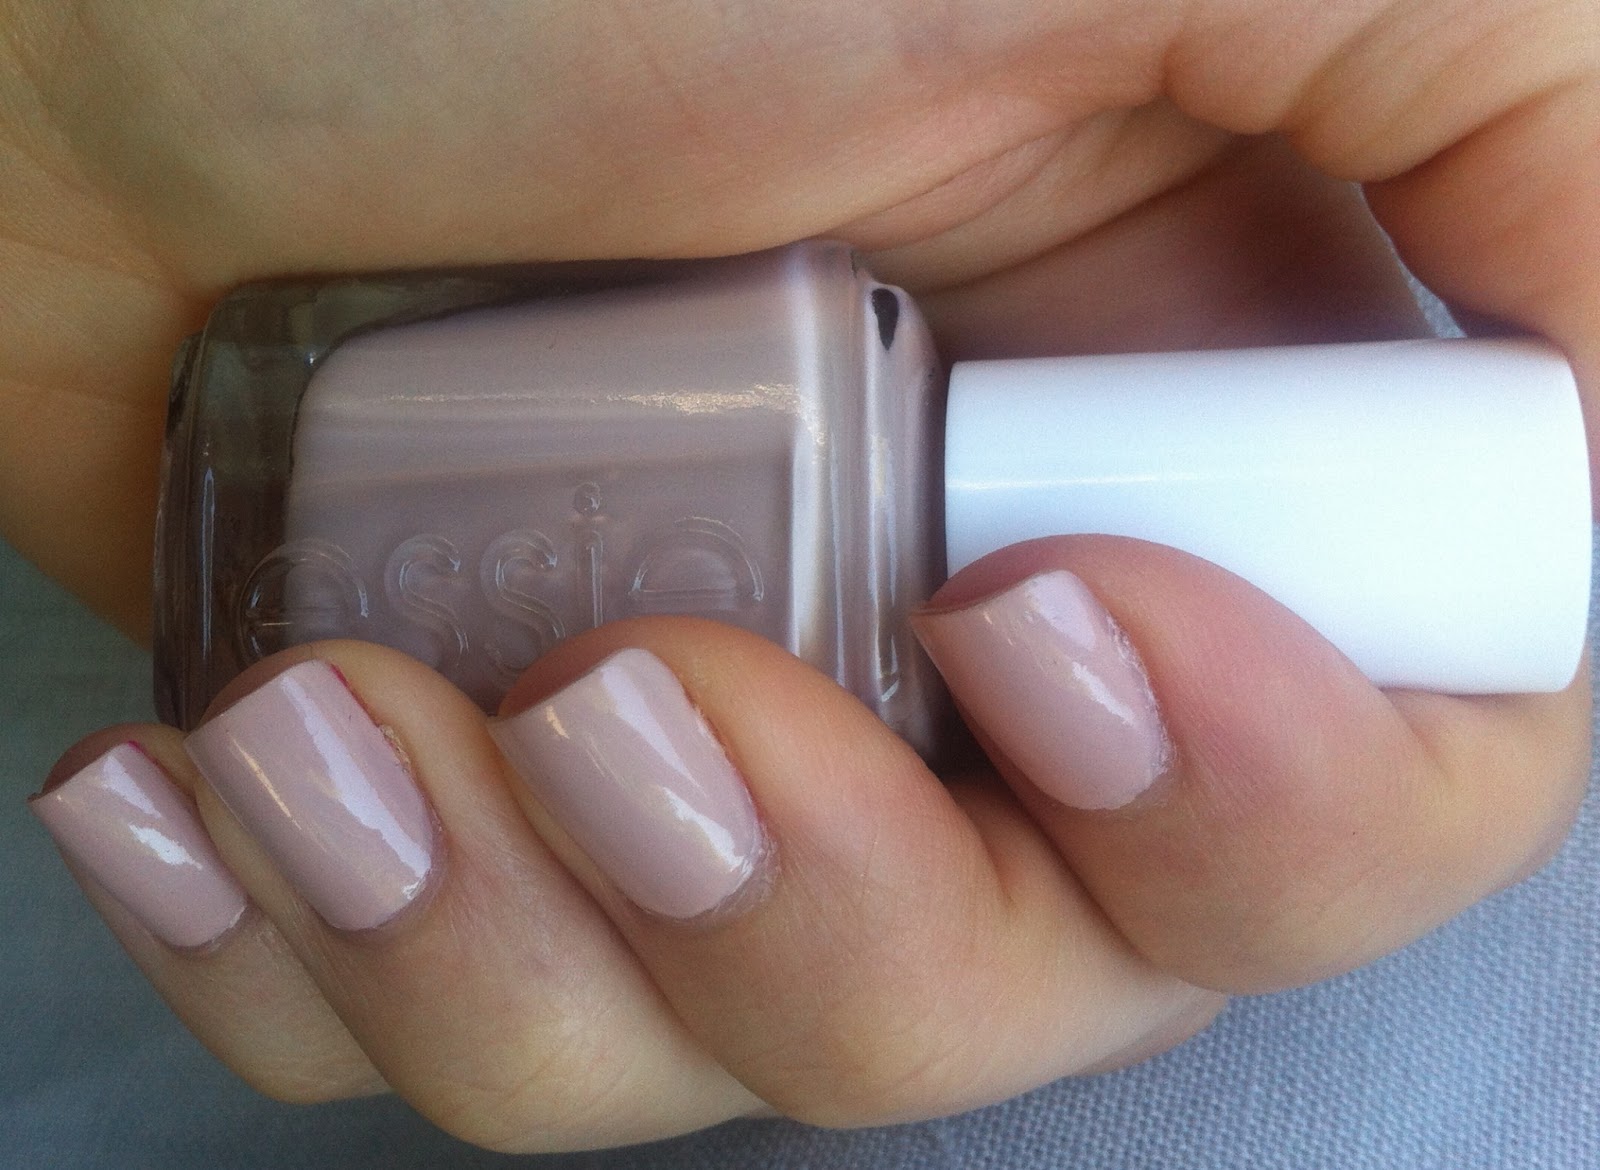 Essie Nail Polish in "Topless & Barefoot" - wide 2